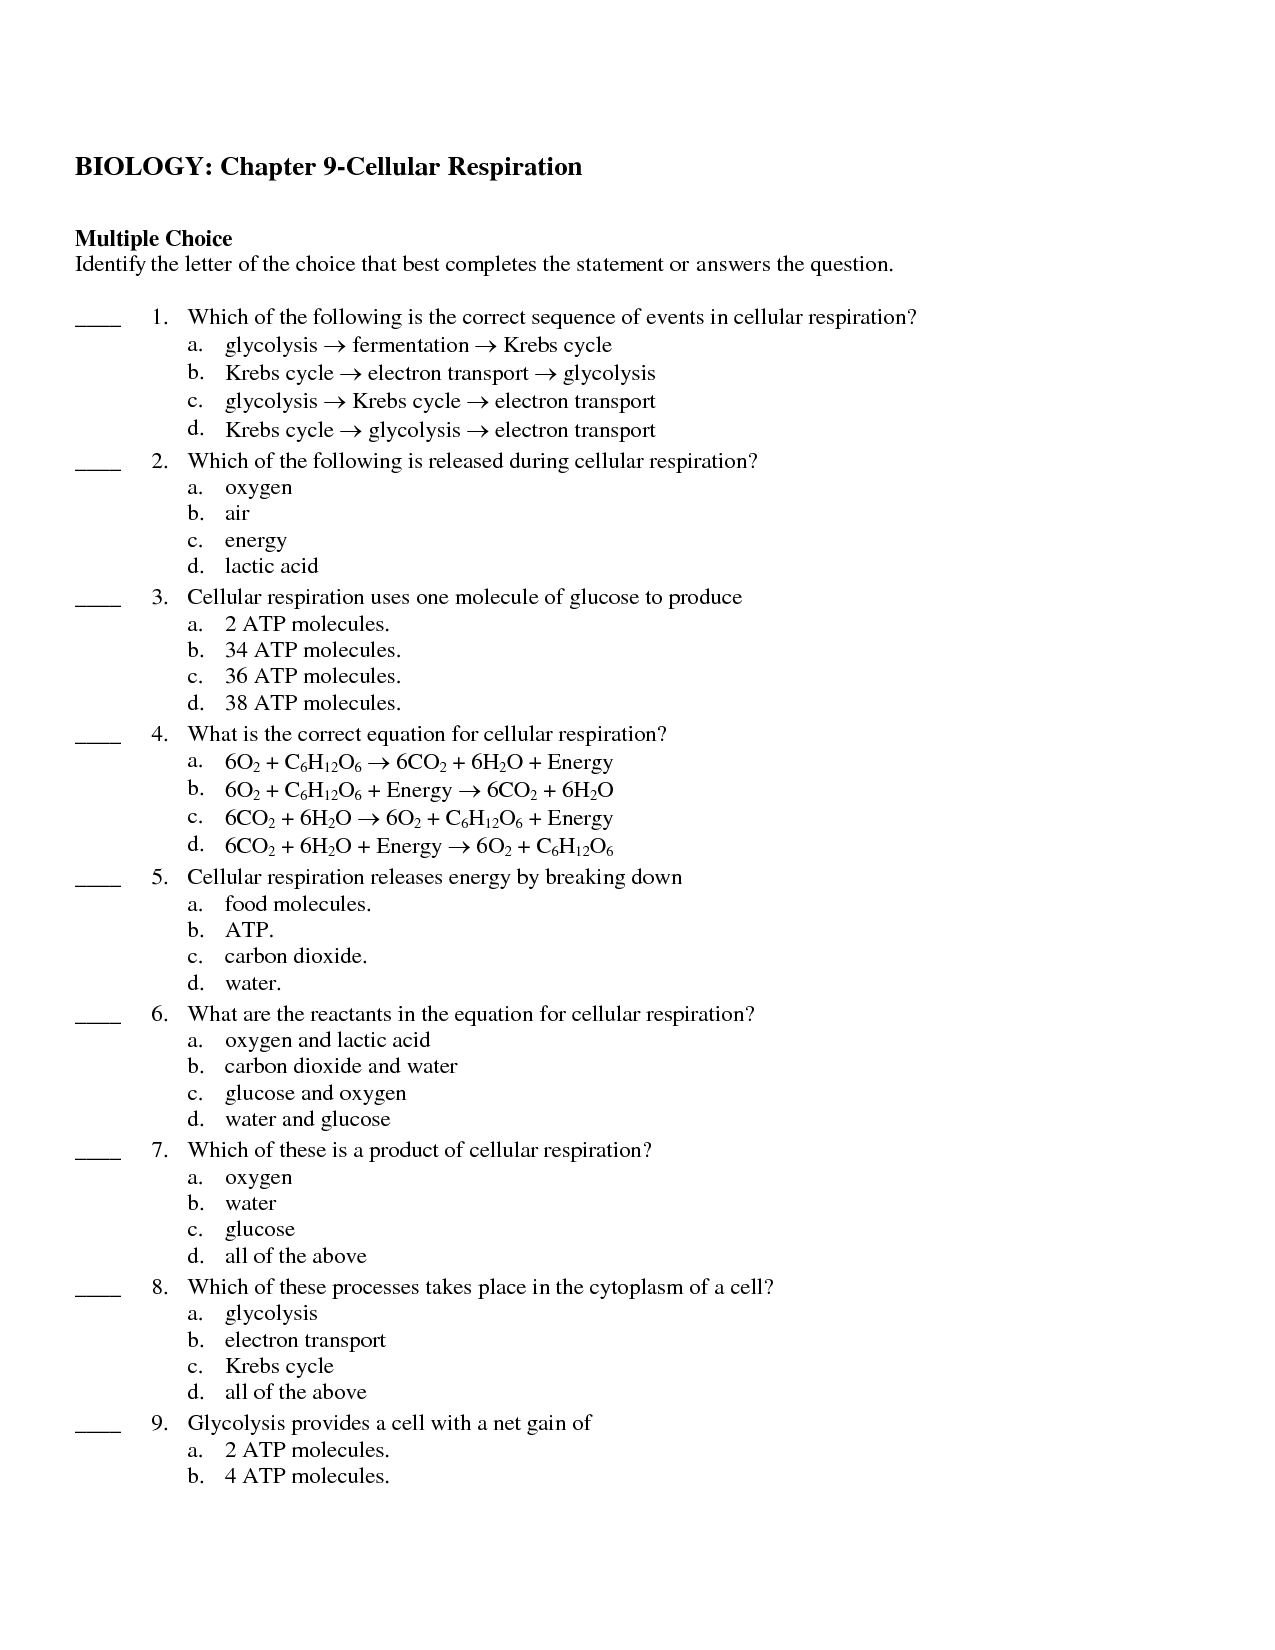 15-best-images-of-glycolysis-worksheet-answers-chapter-9-cellular